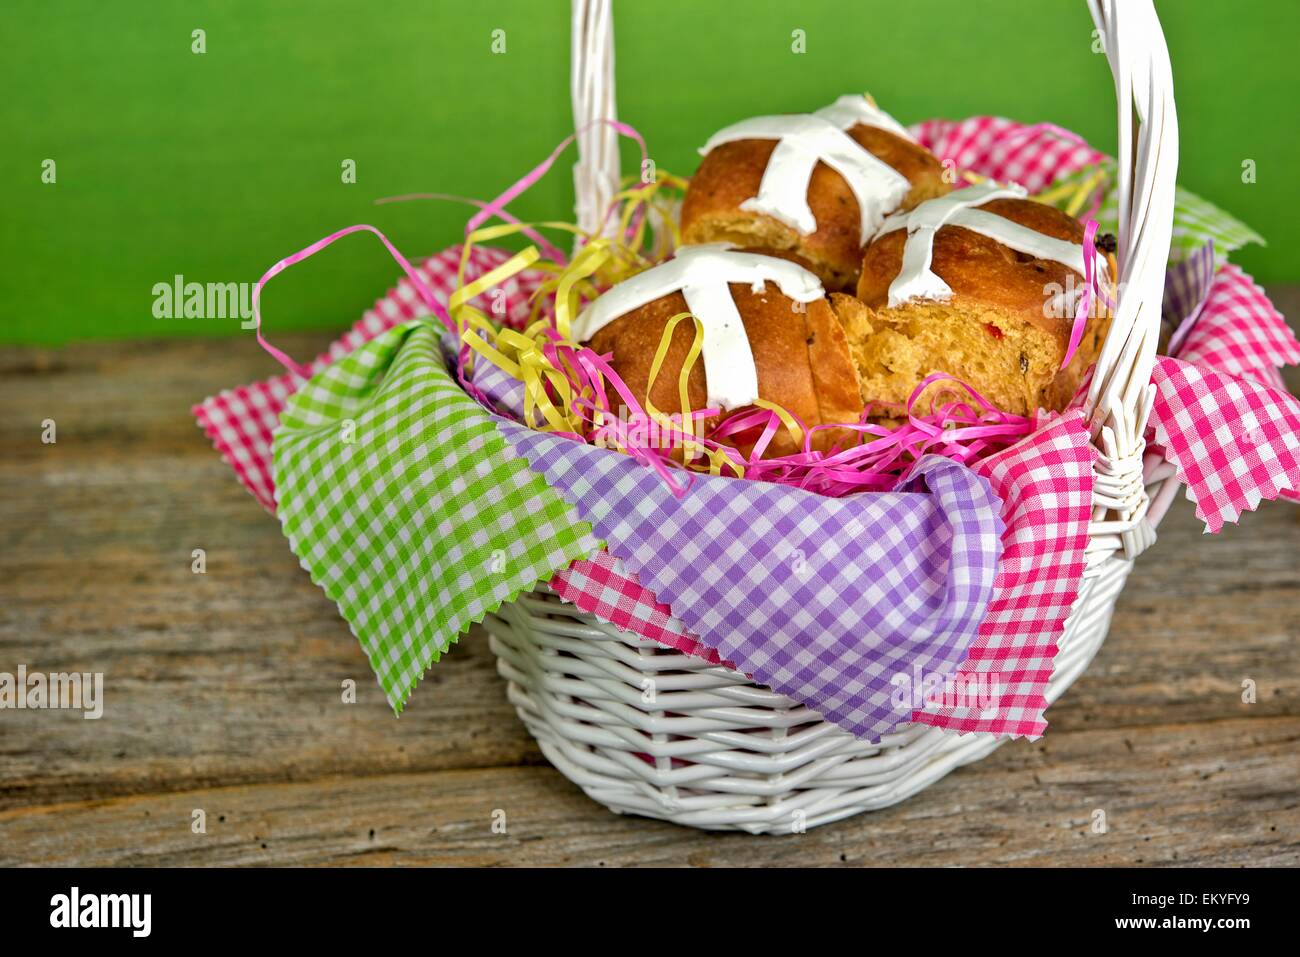 Easter hot cross buns in white wicker basket with gingham fabric. Stock Photo